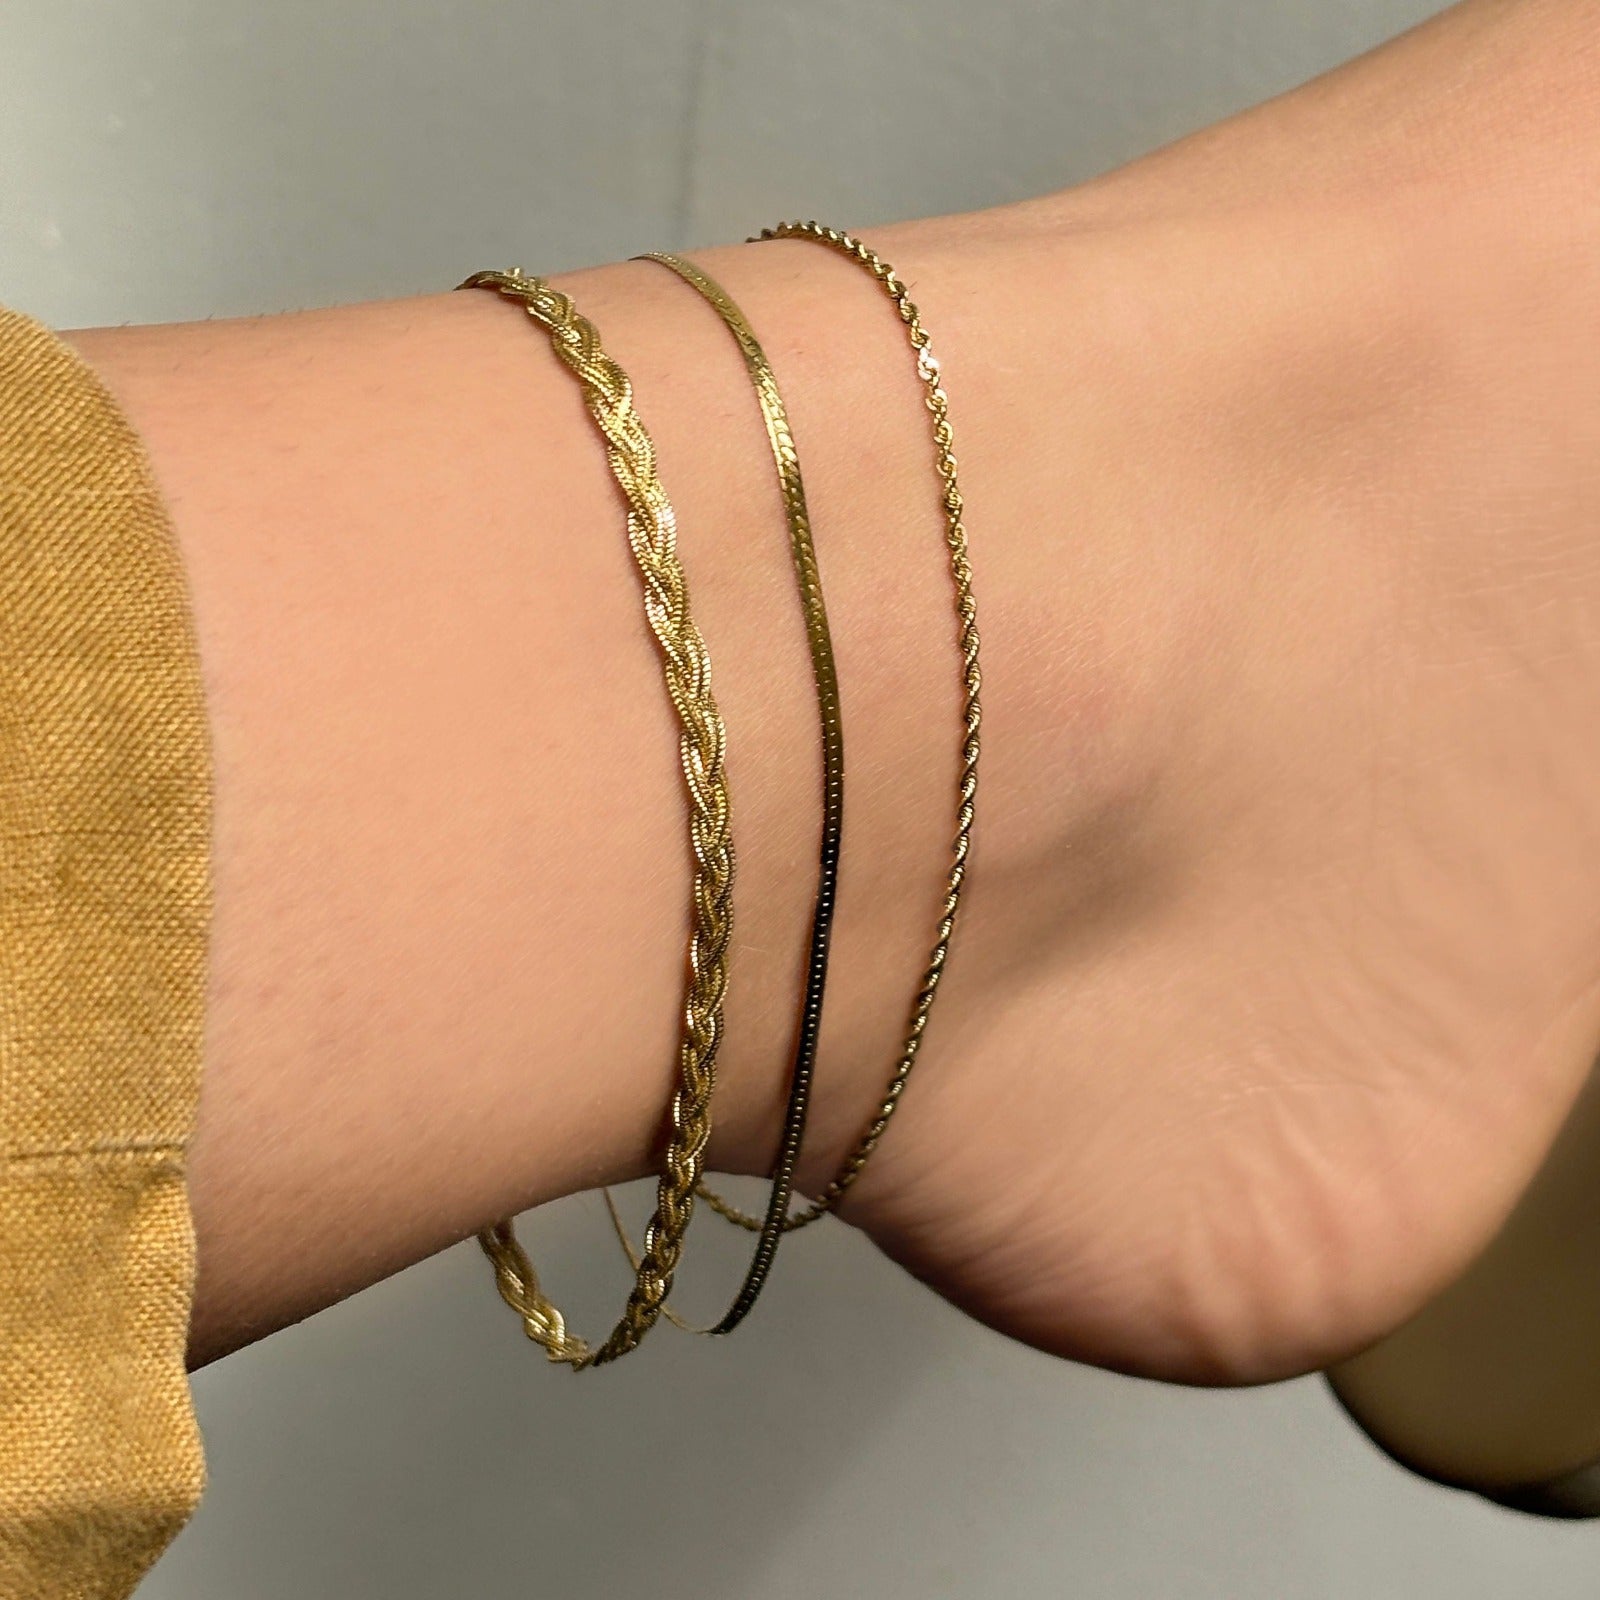 14k gold Braided Fox Chain Anklet styled on an ankled